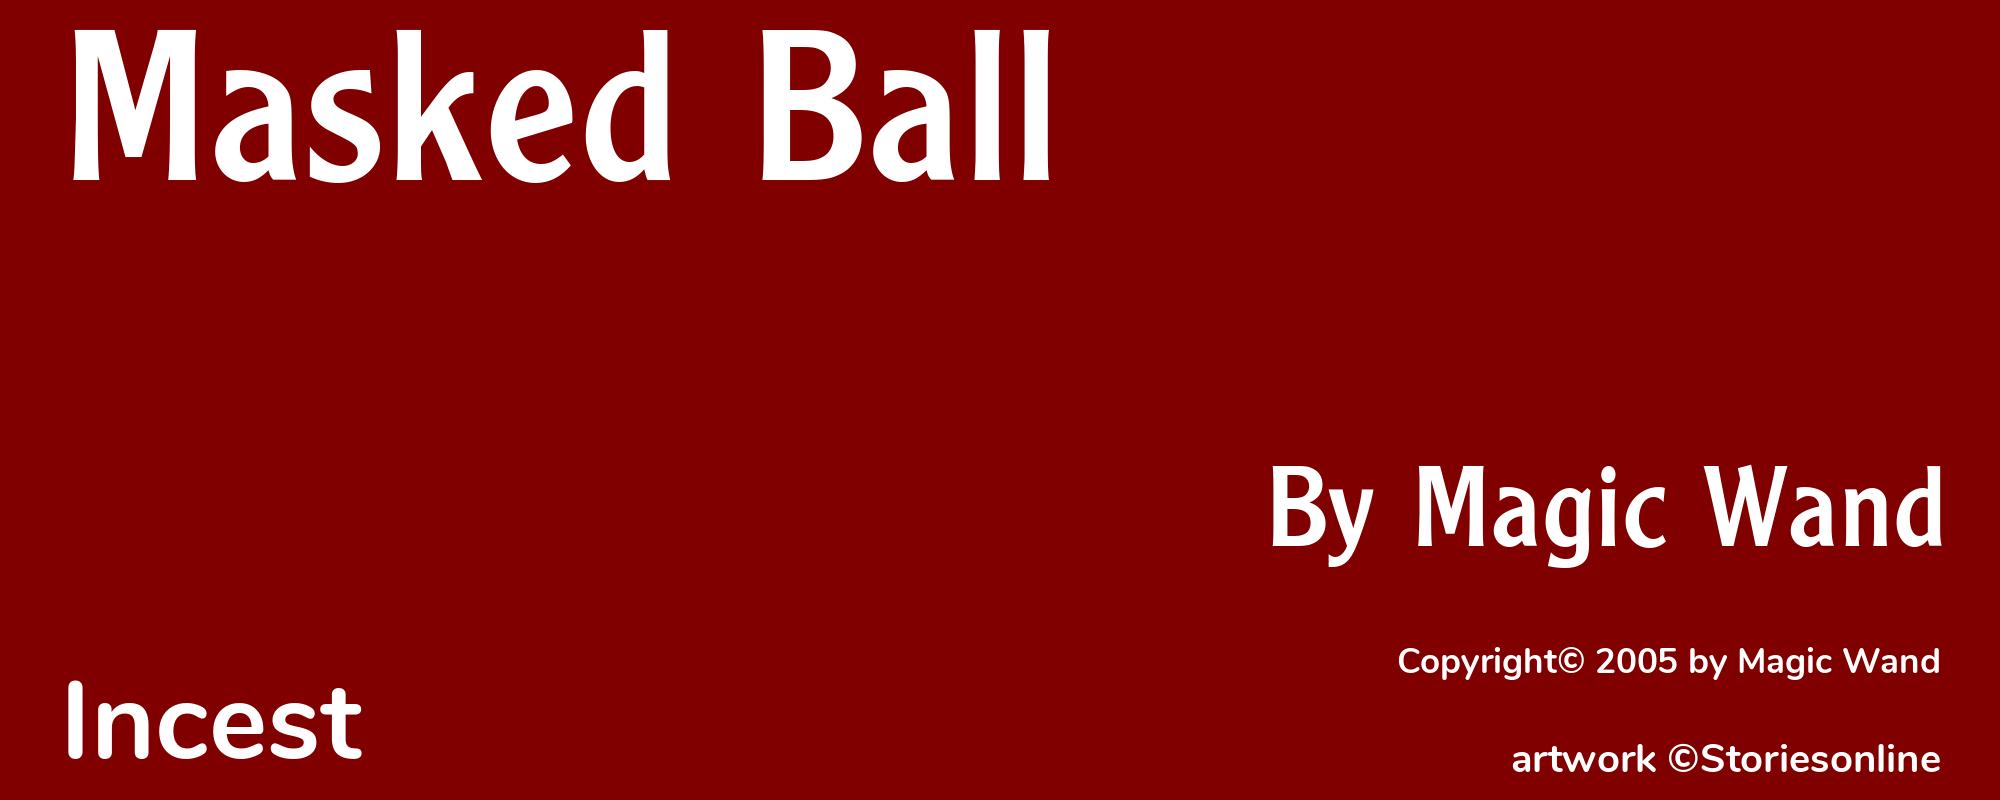 Masked Ball - Cover